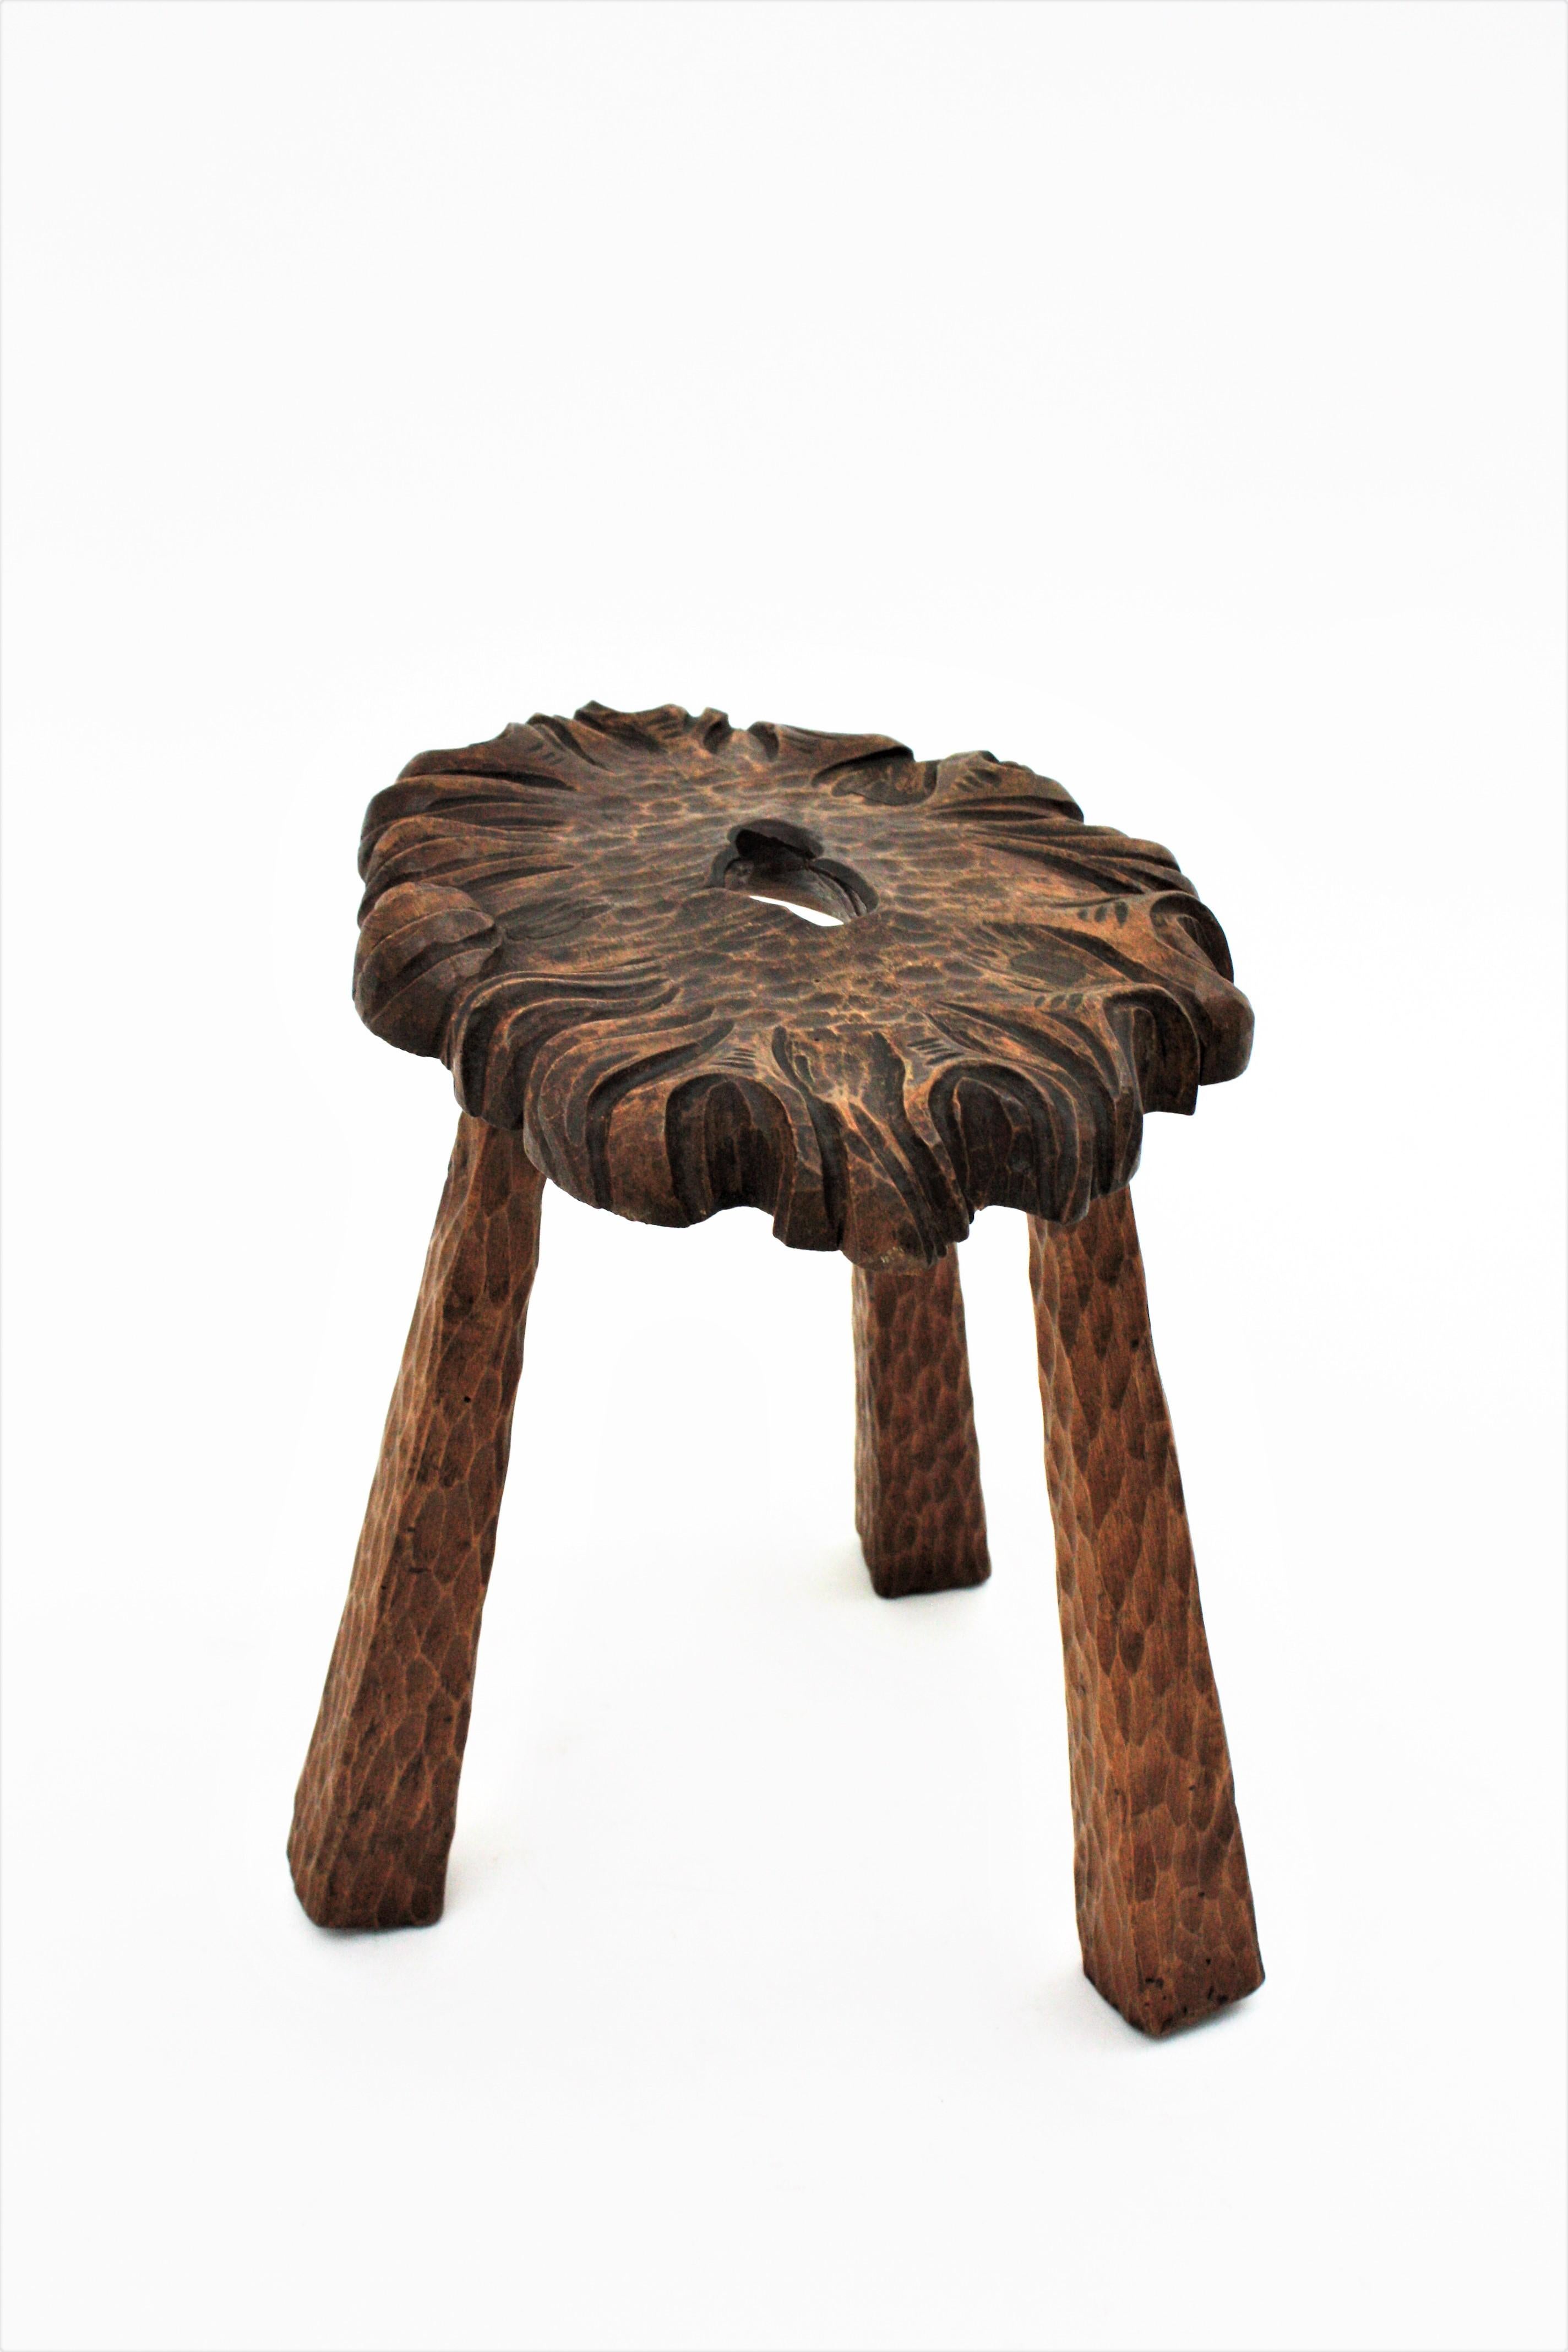 Spanish Rustic Wood Tripod Stool or Side Table For Sale 8